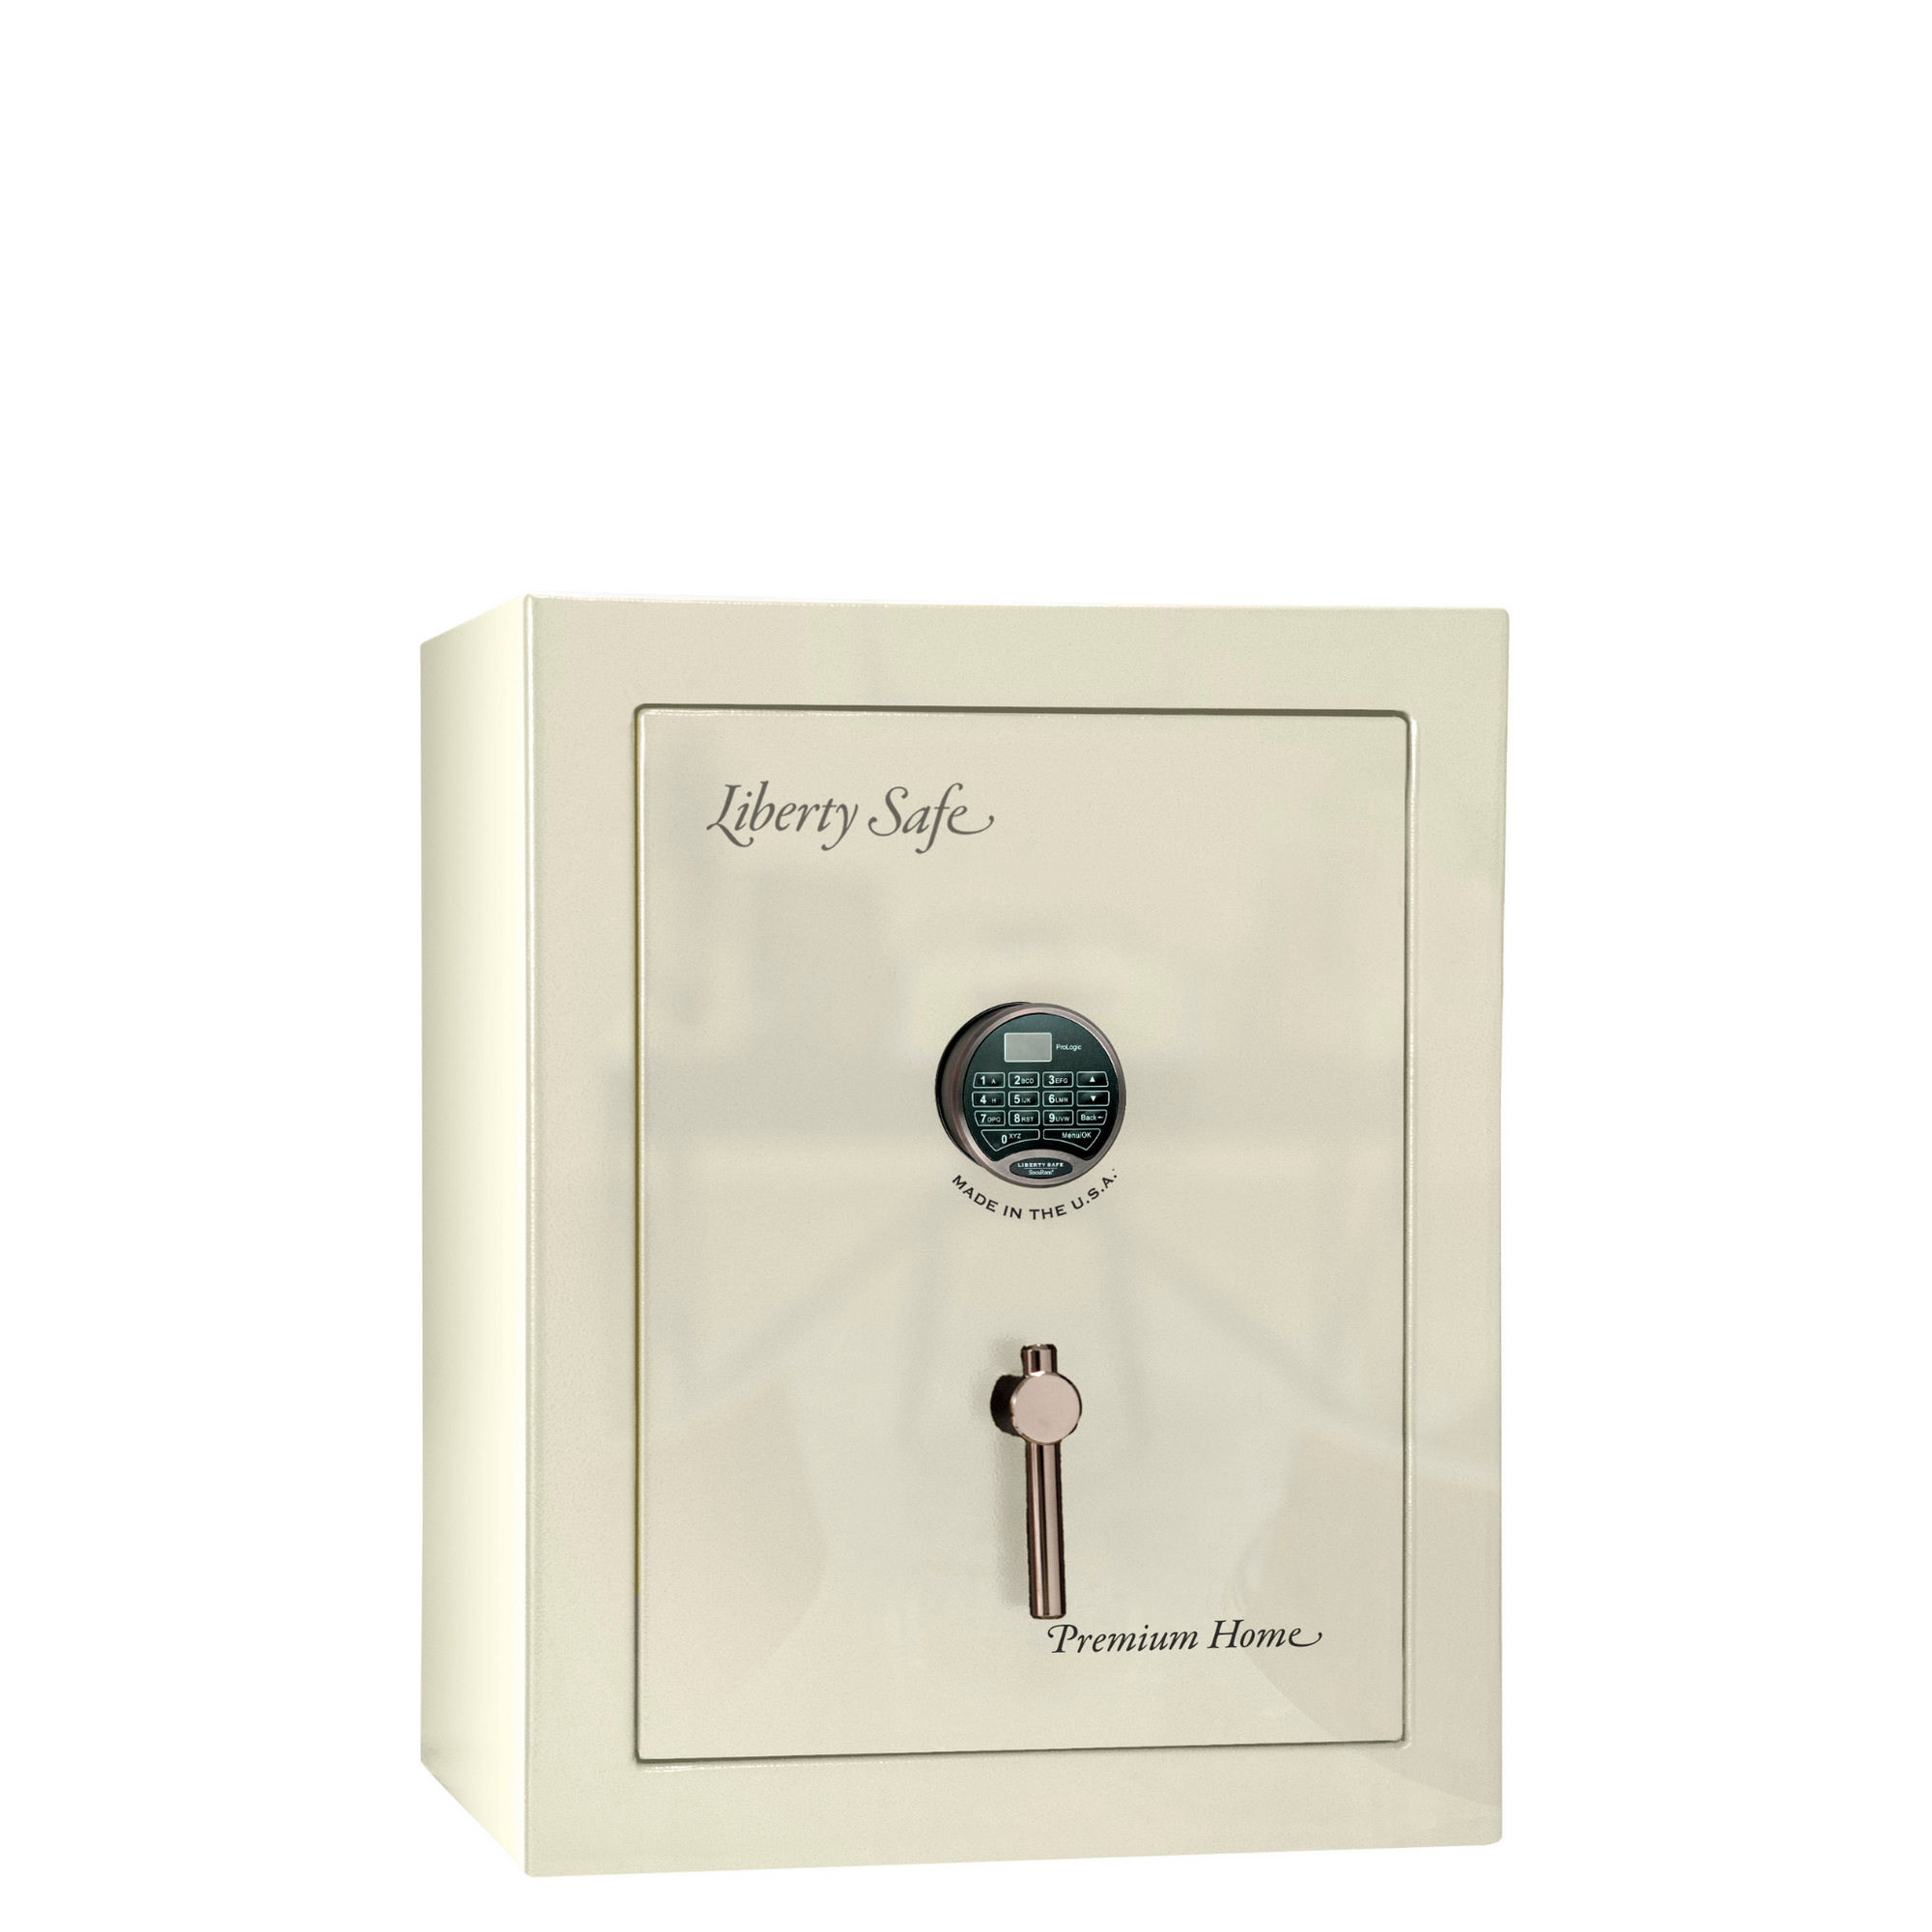 Premium Home Series | Level 7 Security | 2 Hour Fire Protection | 08 | Dimensions: 30"(H) x 24"(W) x 20.25"(D) | White Gloss - Closed Door